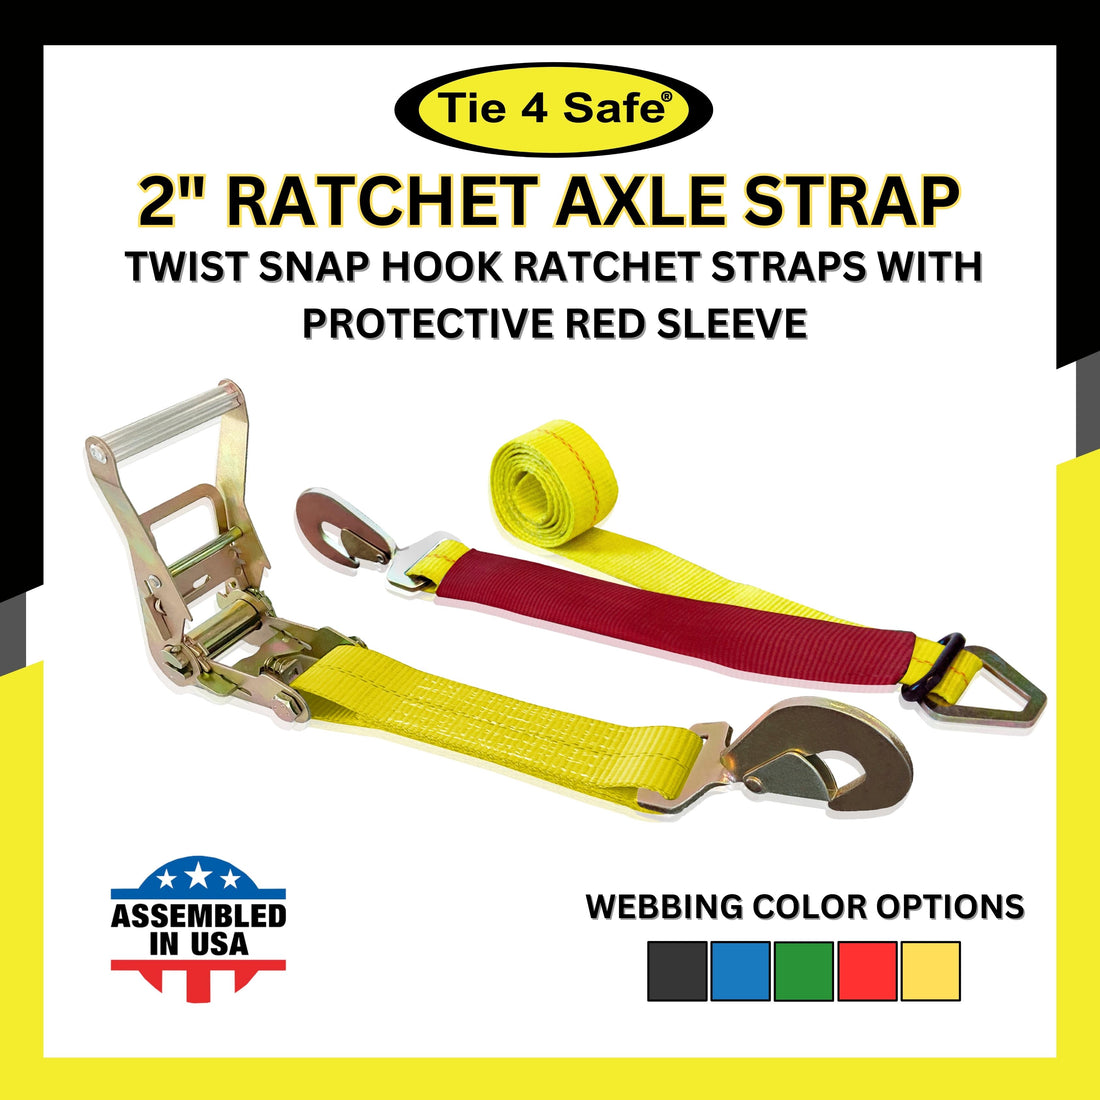 Combo Ratchet & Axle Strap With Twist Hook & Adjustable Axle Strap ( Red Sleeve)